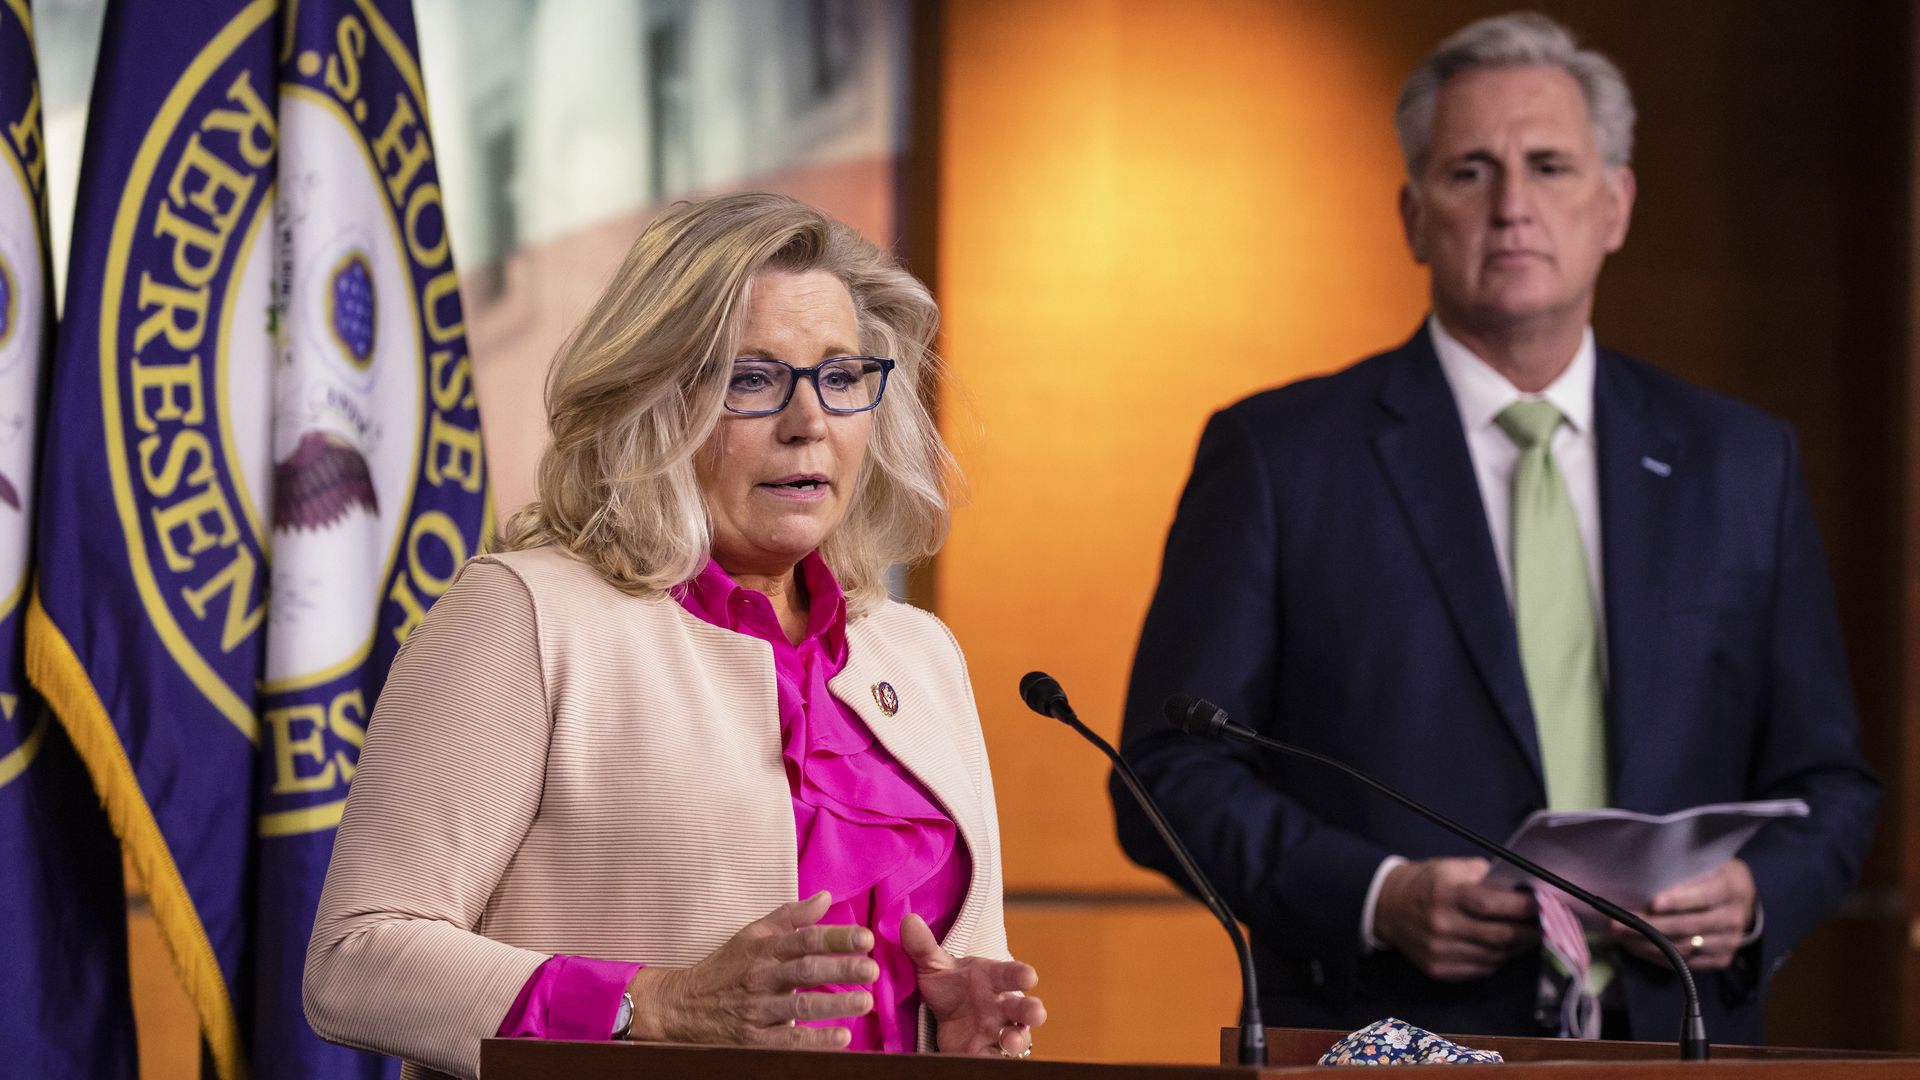 Photo of Liz Cheney speaking from a podium as Kevin McCarthy watches from behind her